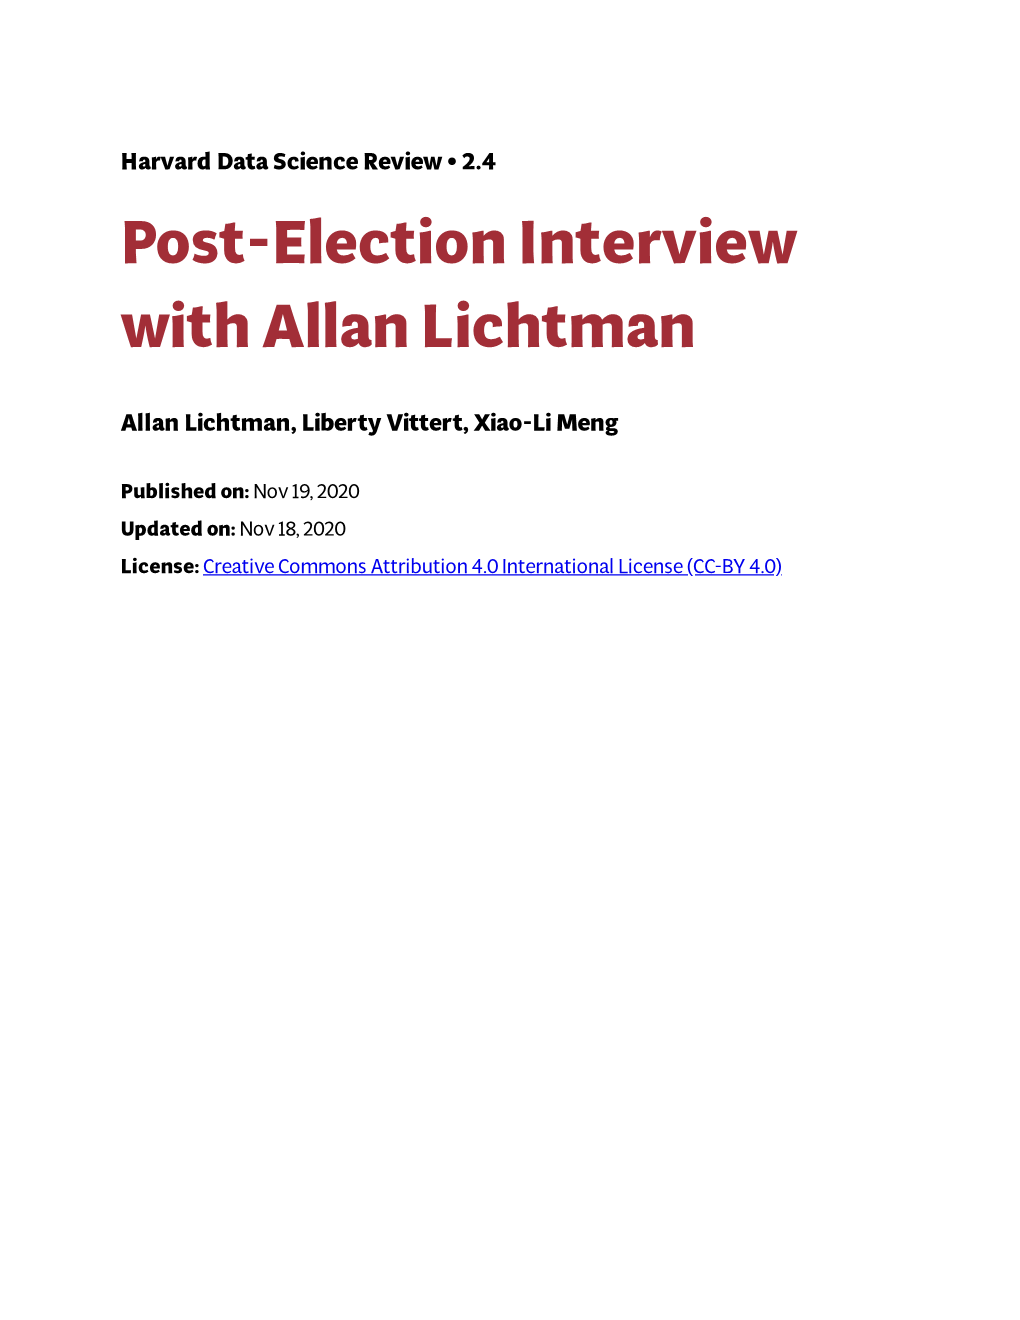 Post-Election Interview with Allan Lichtman